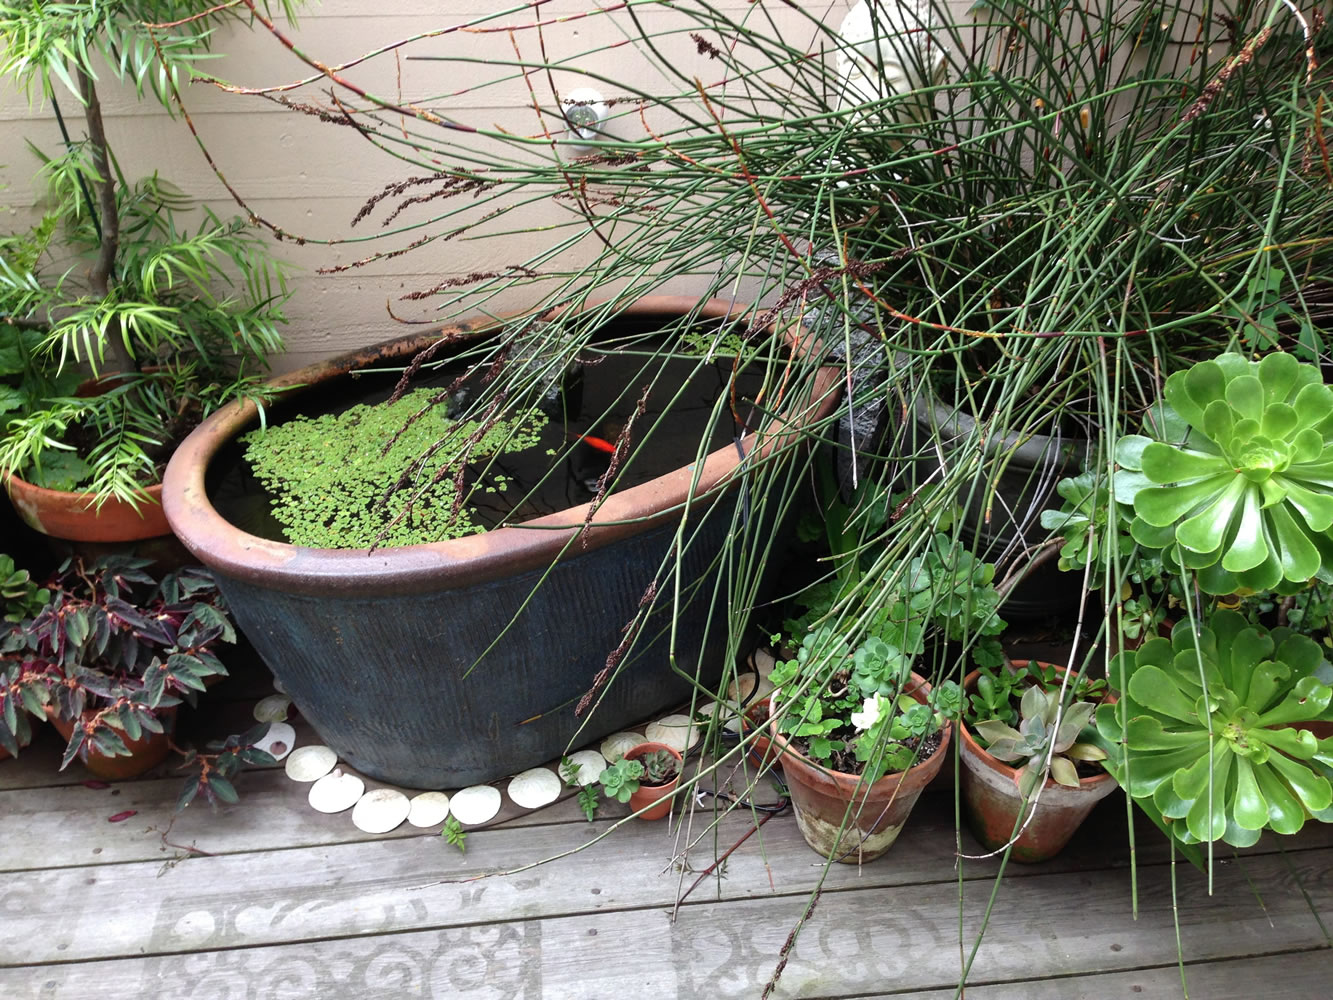 This Aug. 19, 2014 image released by Glen Gage shows a container pond put together using a planter on a patio in San Francisco.